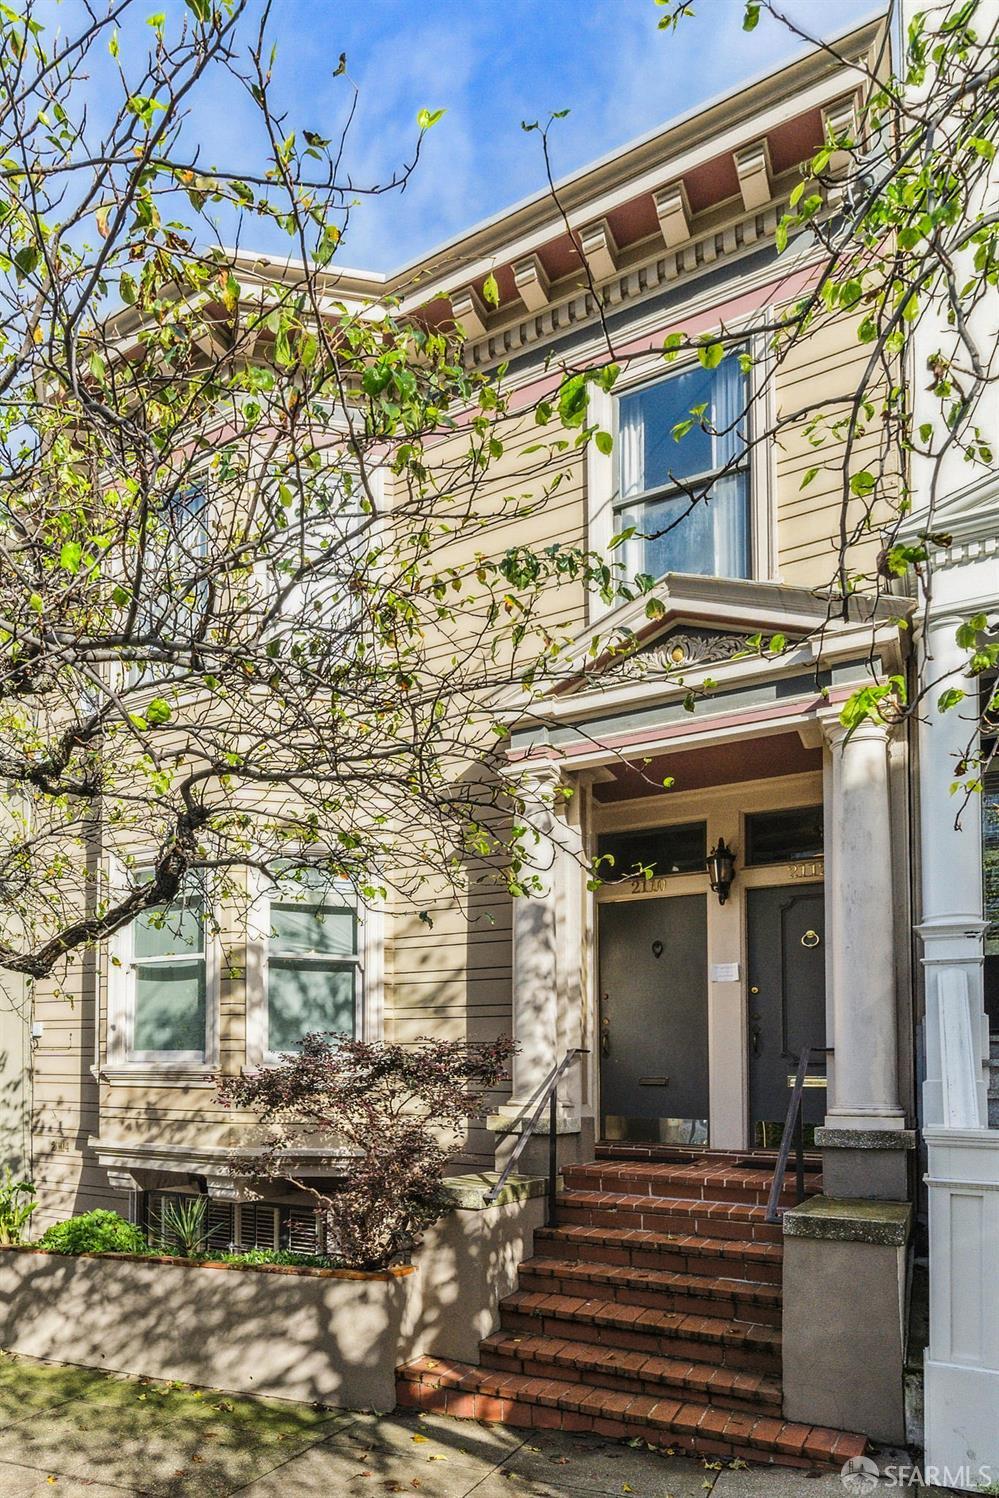 2110 Leavenworth is the middle of a 3-unit Victorian